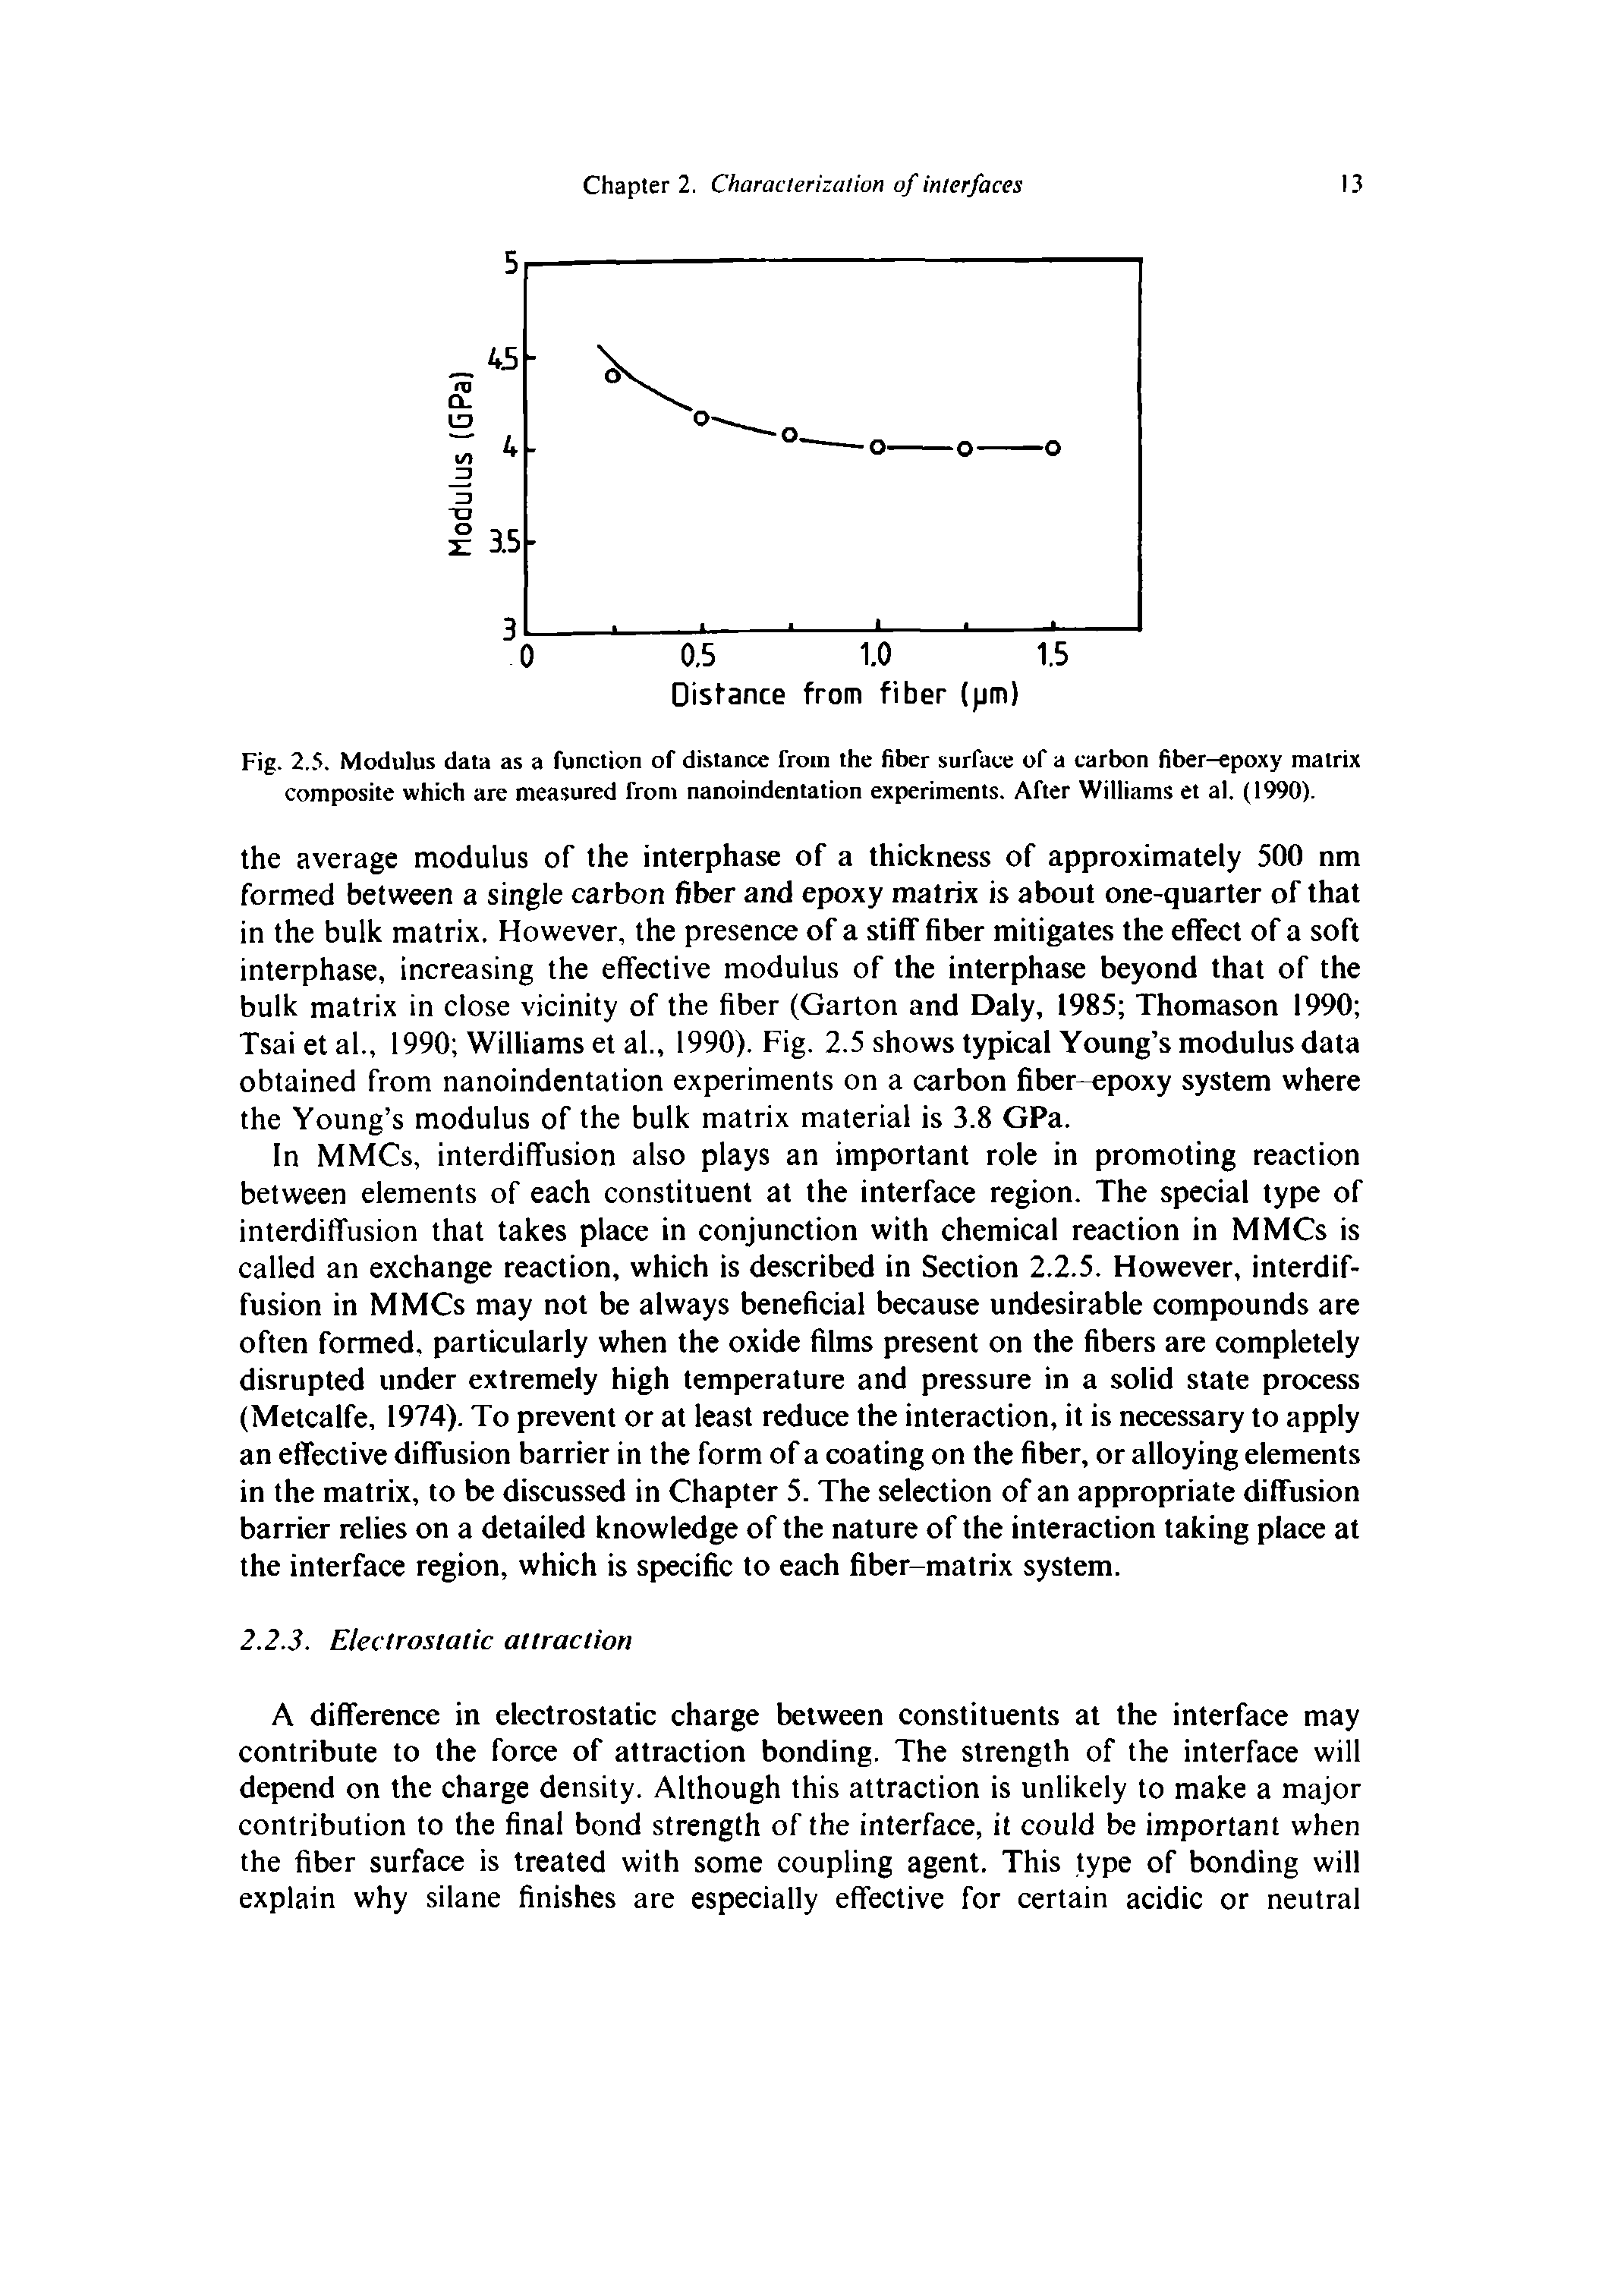 Fig. 2.5. Modulus data as a function of distance from the fiber surface of a carbon fiber-epoxy matrix composite which are measured from nanoindentation experiments. After Williams et al. (1990).